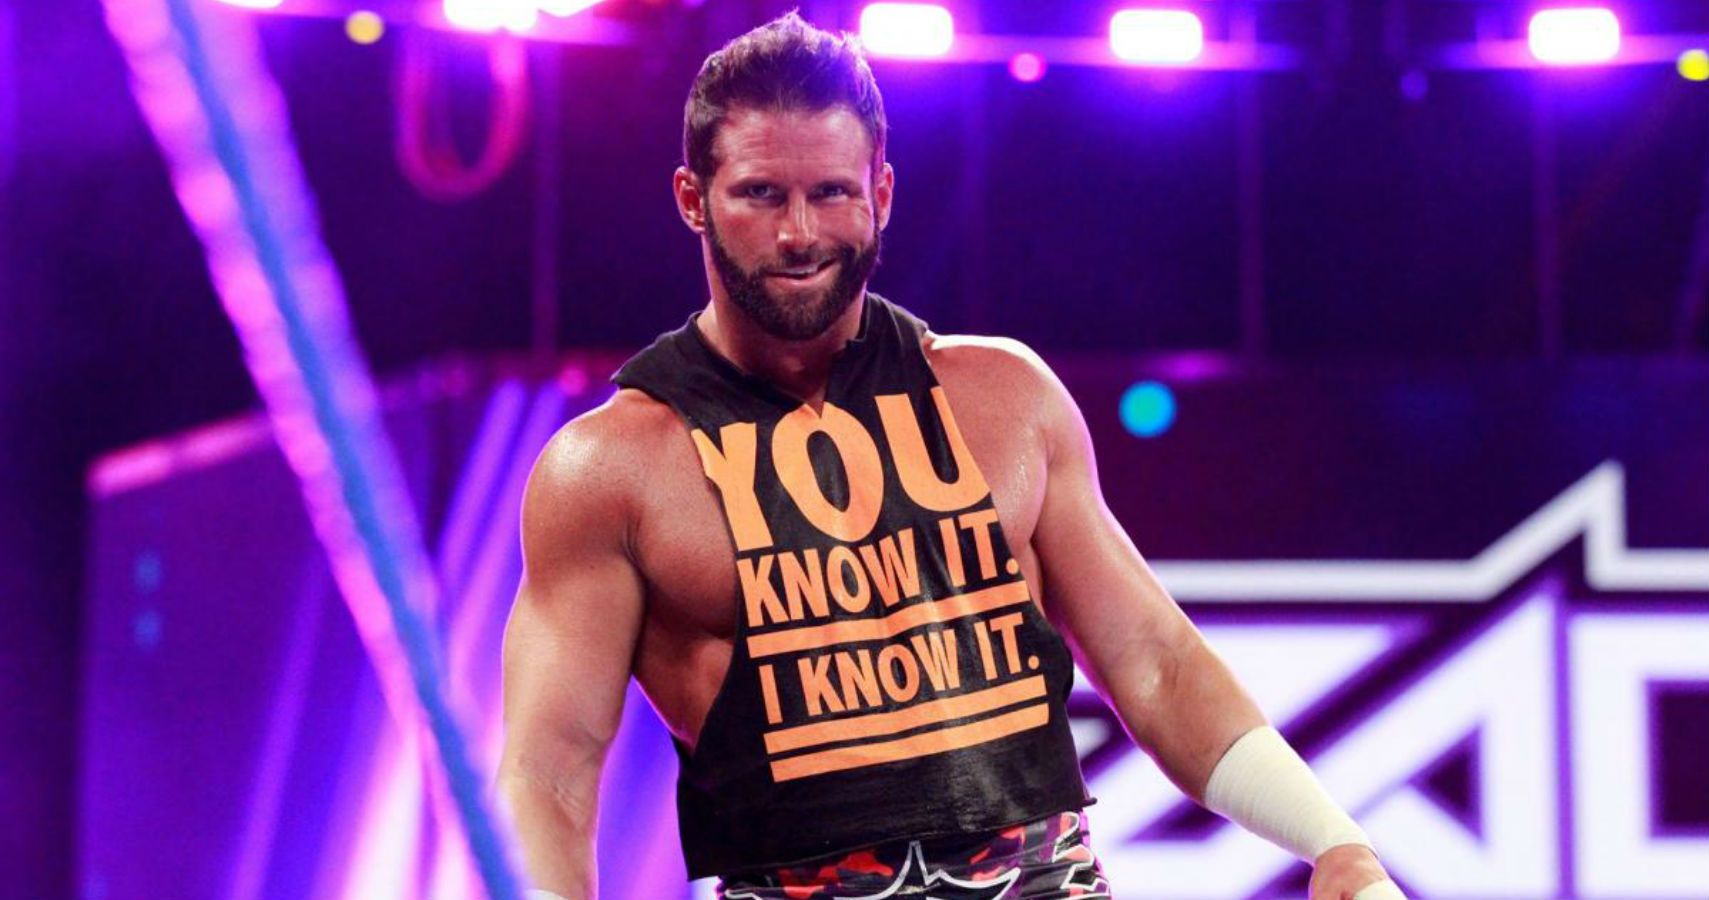 Zack Ryder Boasts He's The Longest Reigning Champion In WWE History